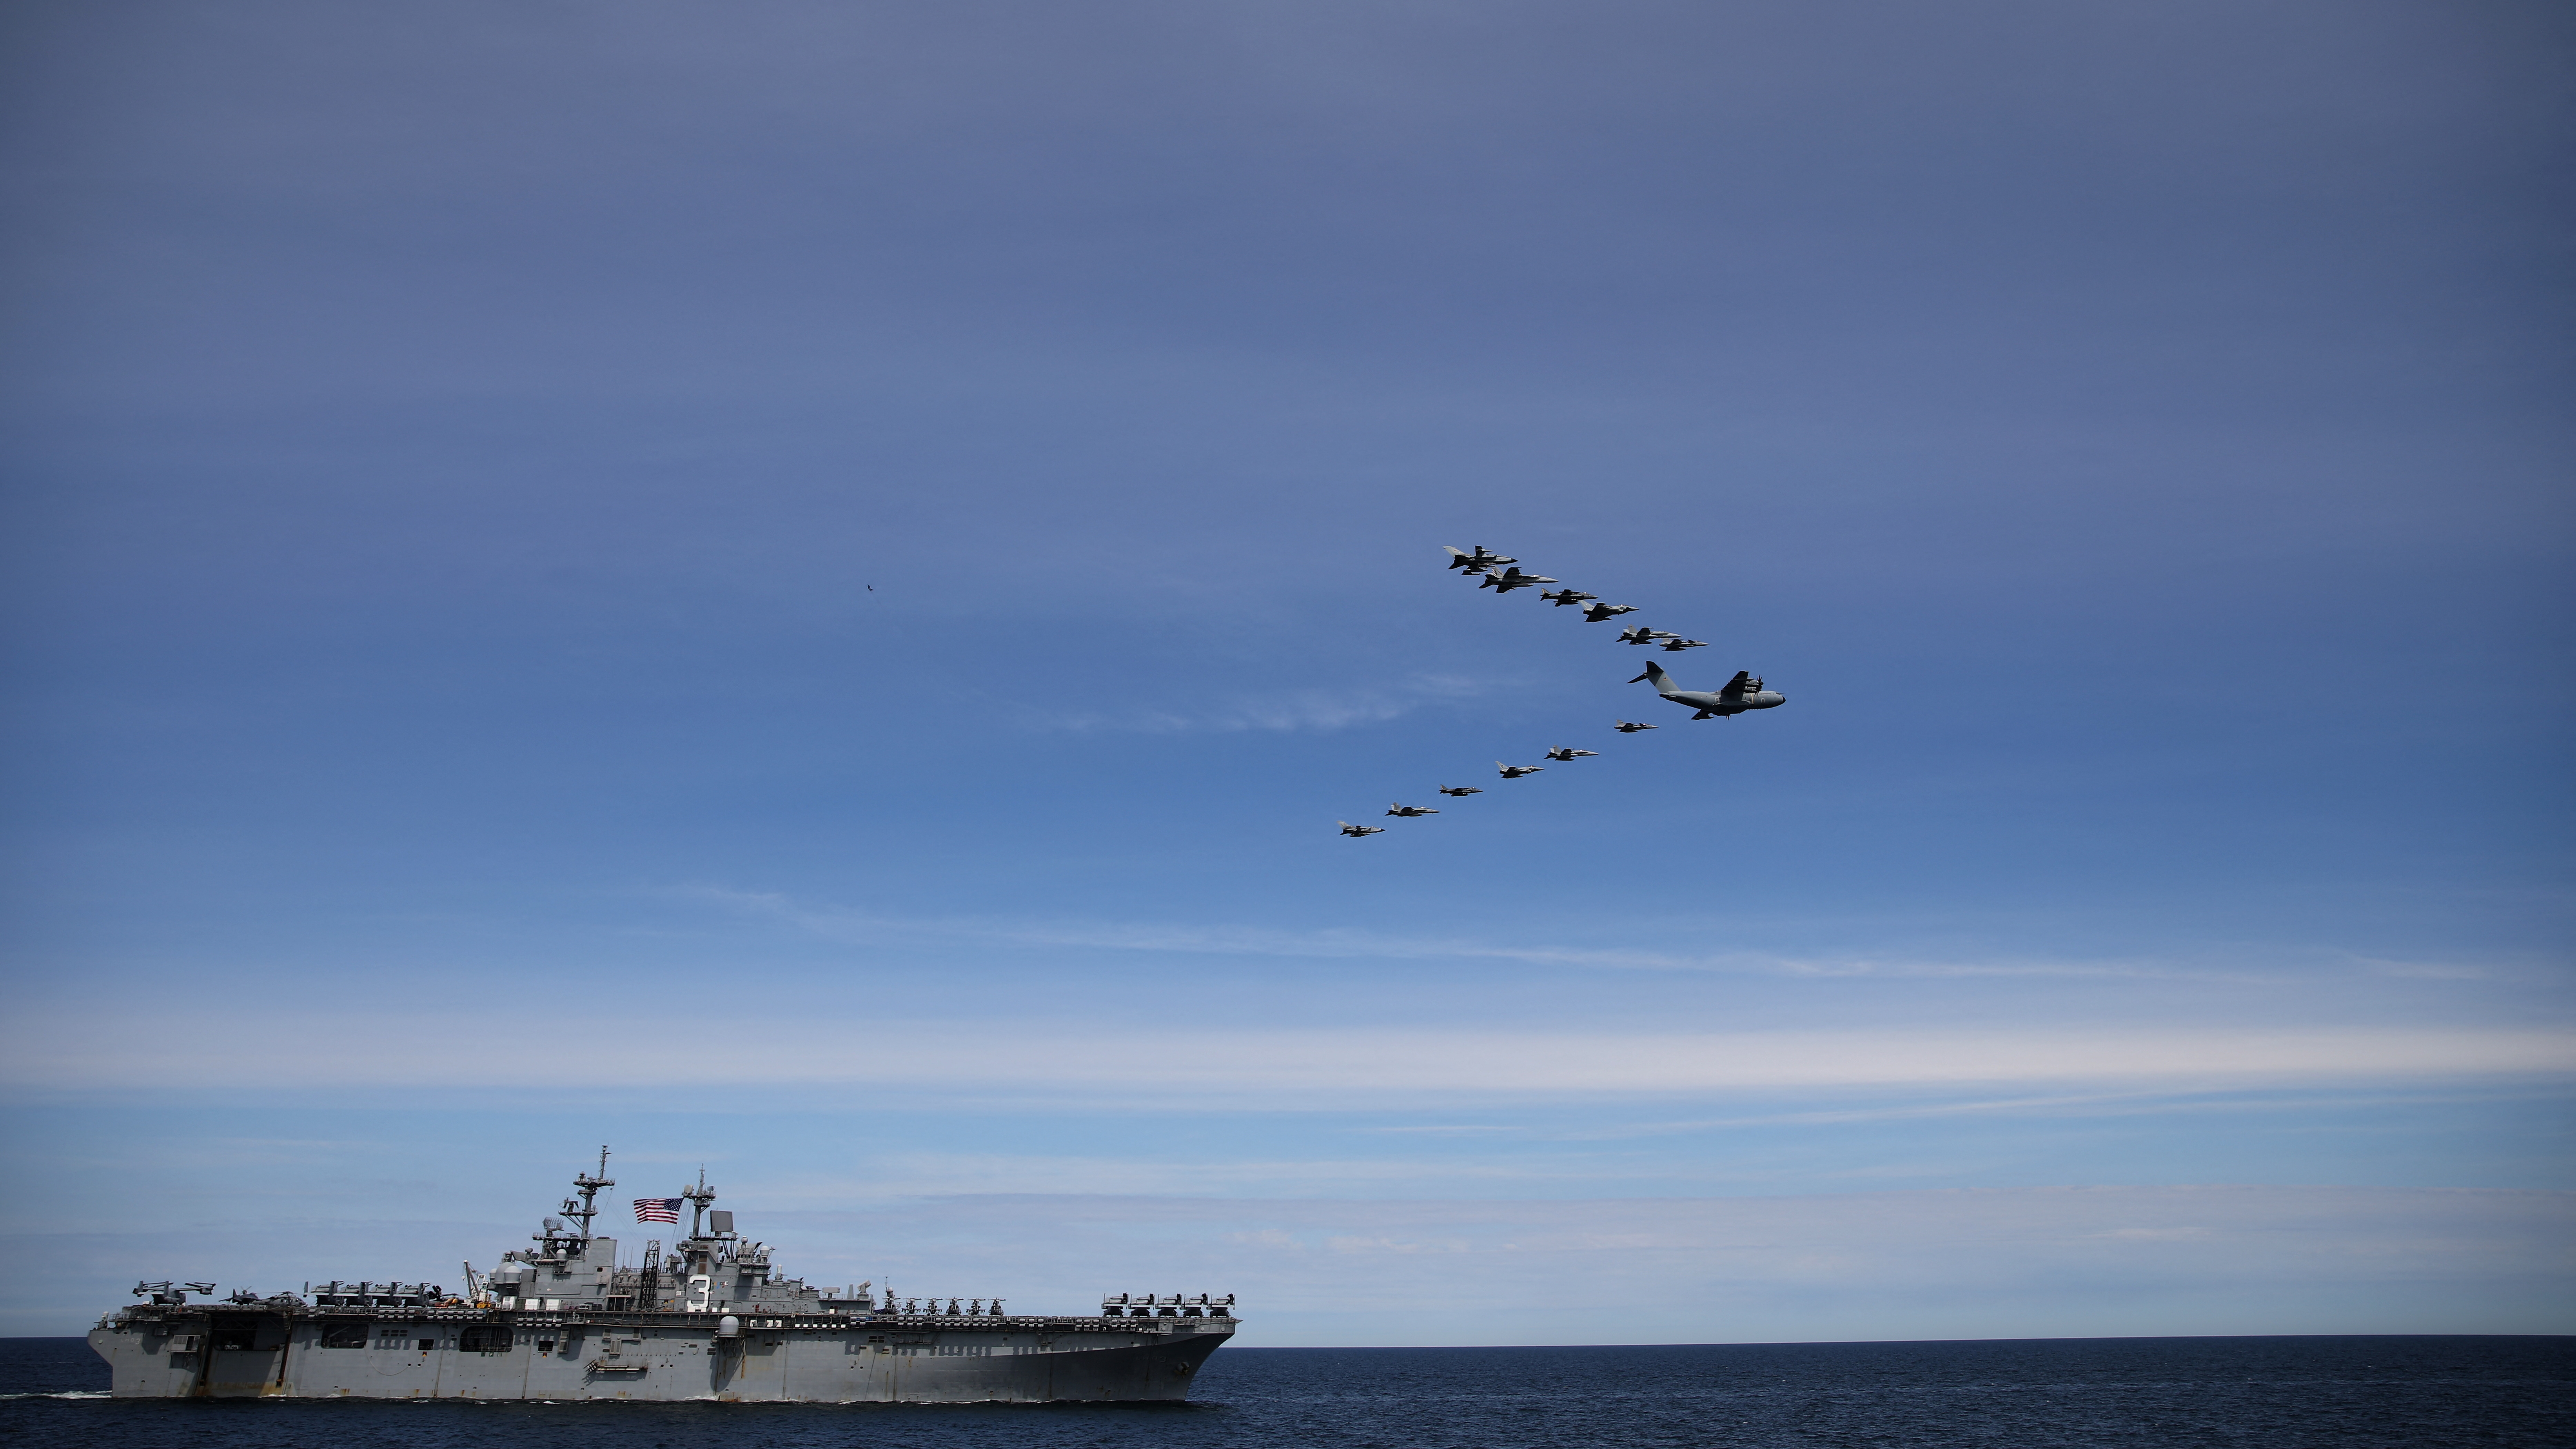 A German transport plane leads a multinational fighter jet formation over the U.S. navy Wasp-class amphibious assault ship USS Kearsarge (LHD 3) during the first event of the Baltops 22 exercise in Baltic Sea, June 6, 2022. Picture taken June 6, 2022.  REUTERS/Stoyan Nenov